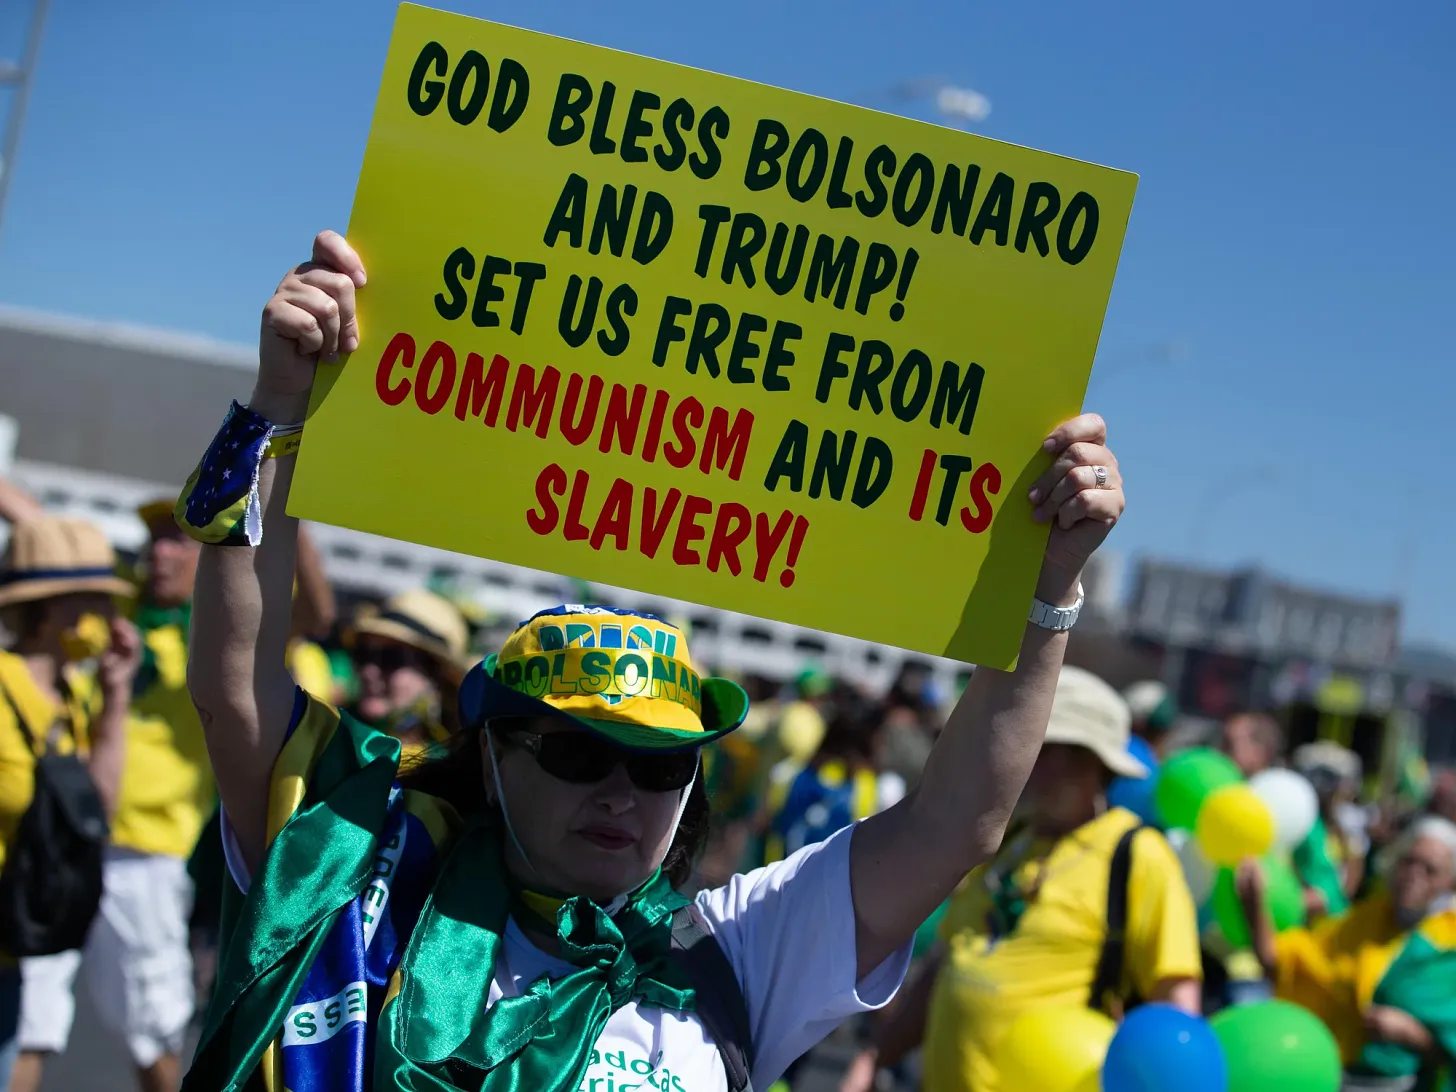 Brazil bans Bolsonaro from future ballot while Trump goes unpunished two and half years after Jan 6 (deanobeidallah.substack.com)